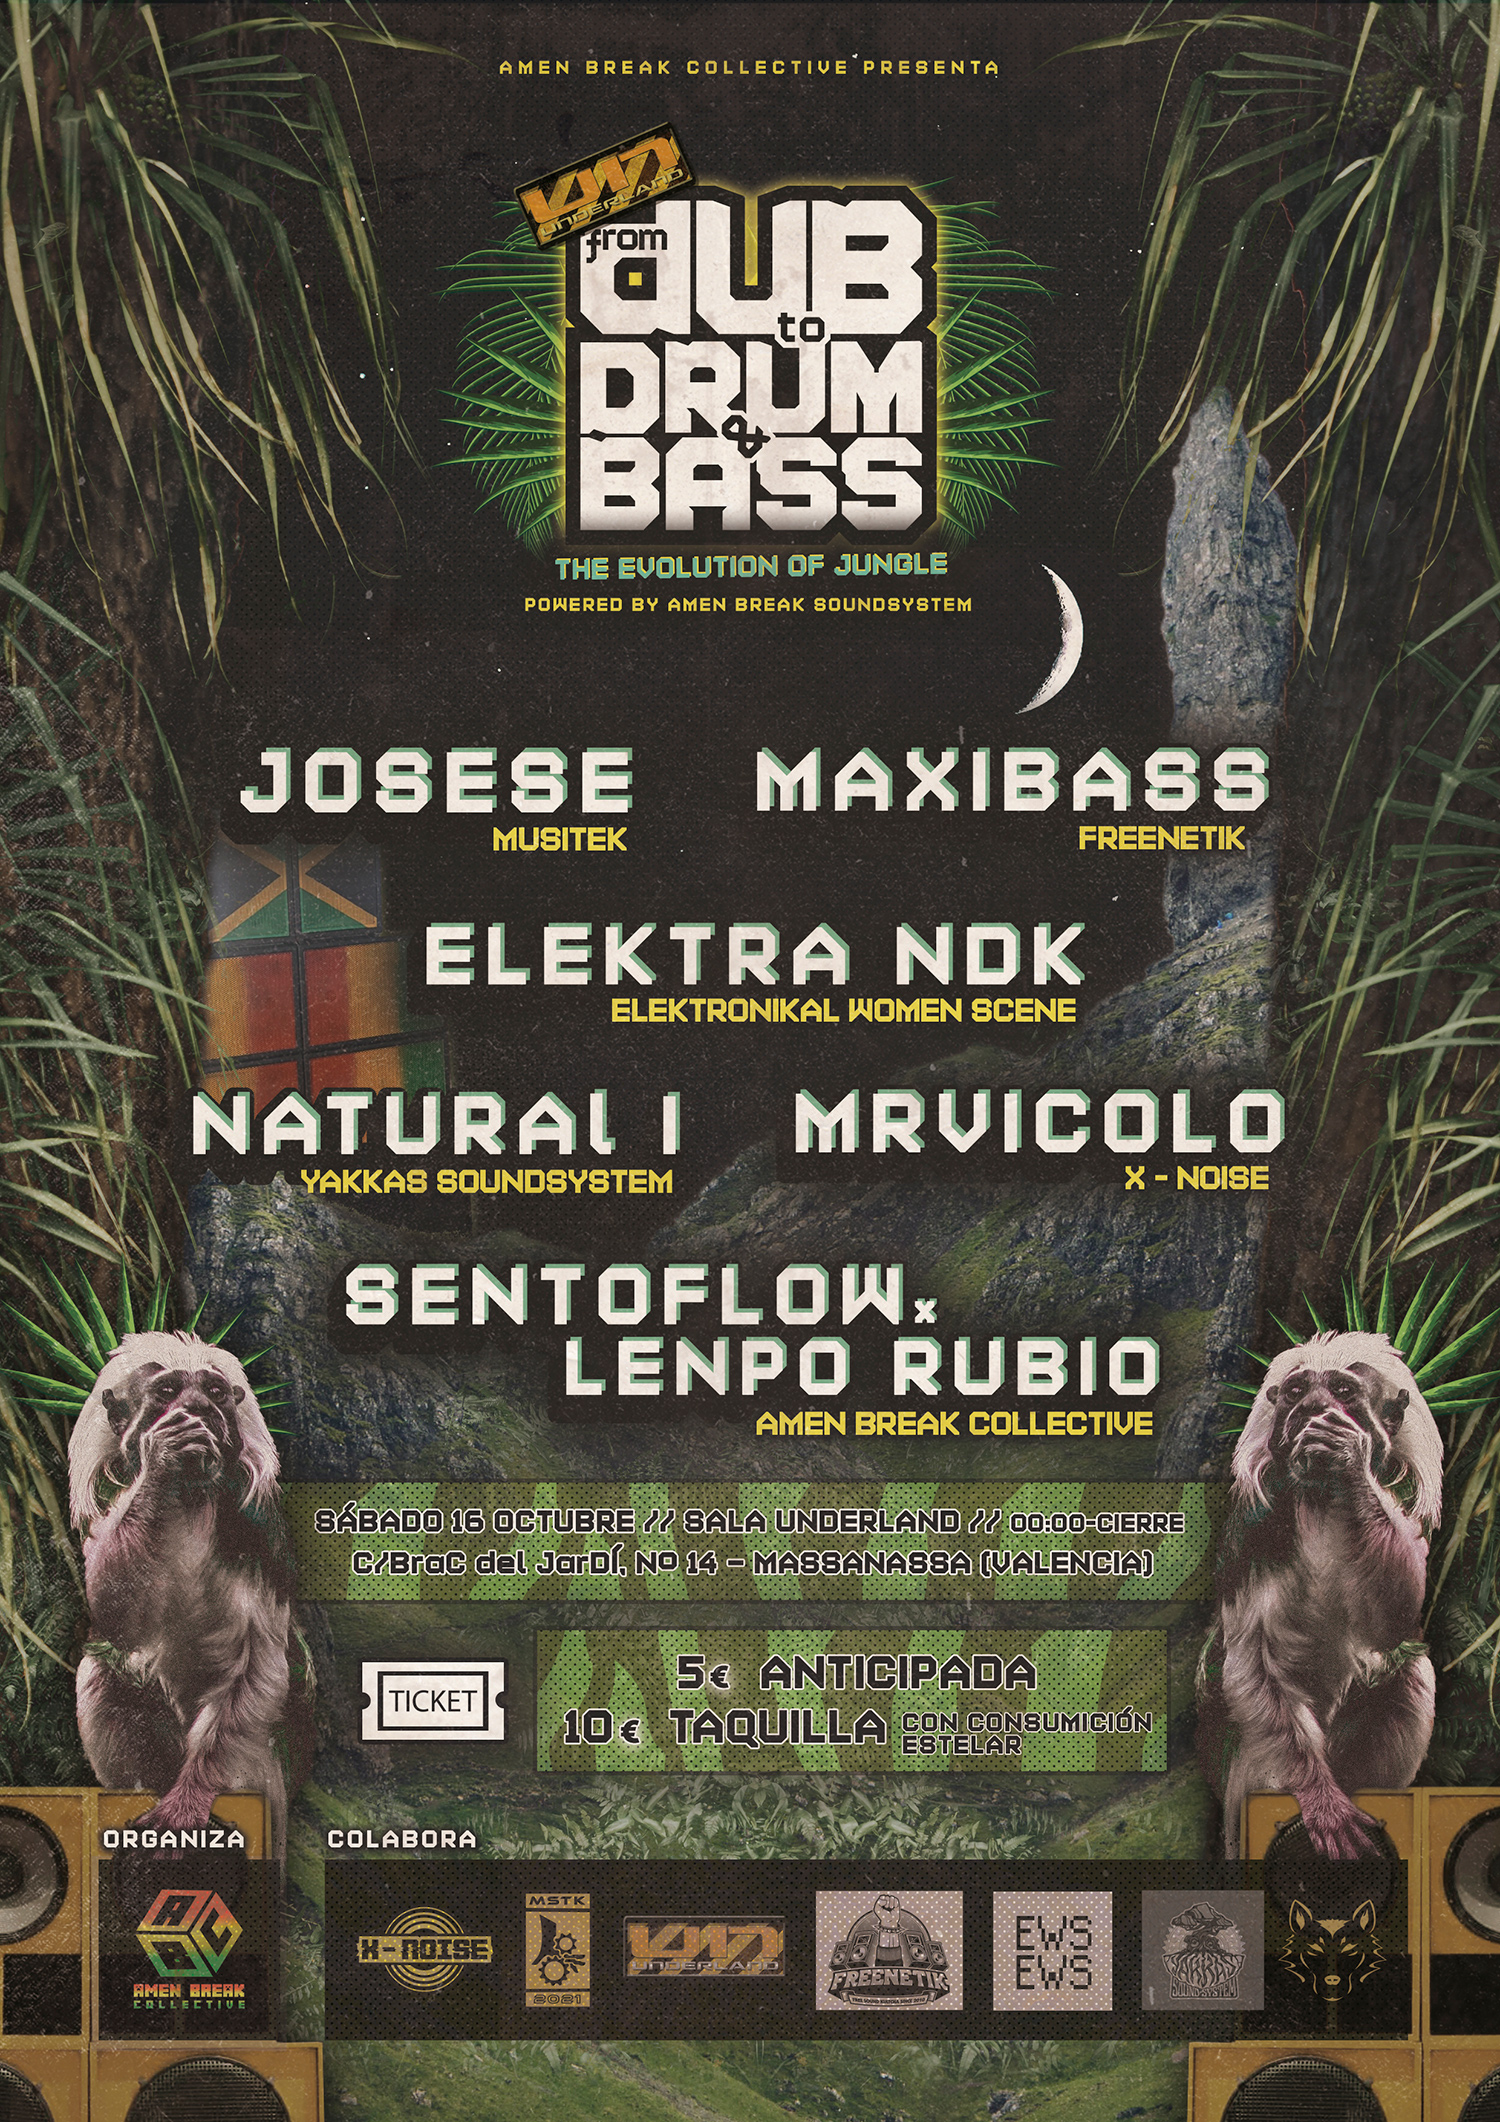 From Dub to Drum and bass - Valencia Edition 2